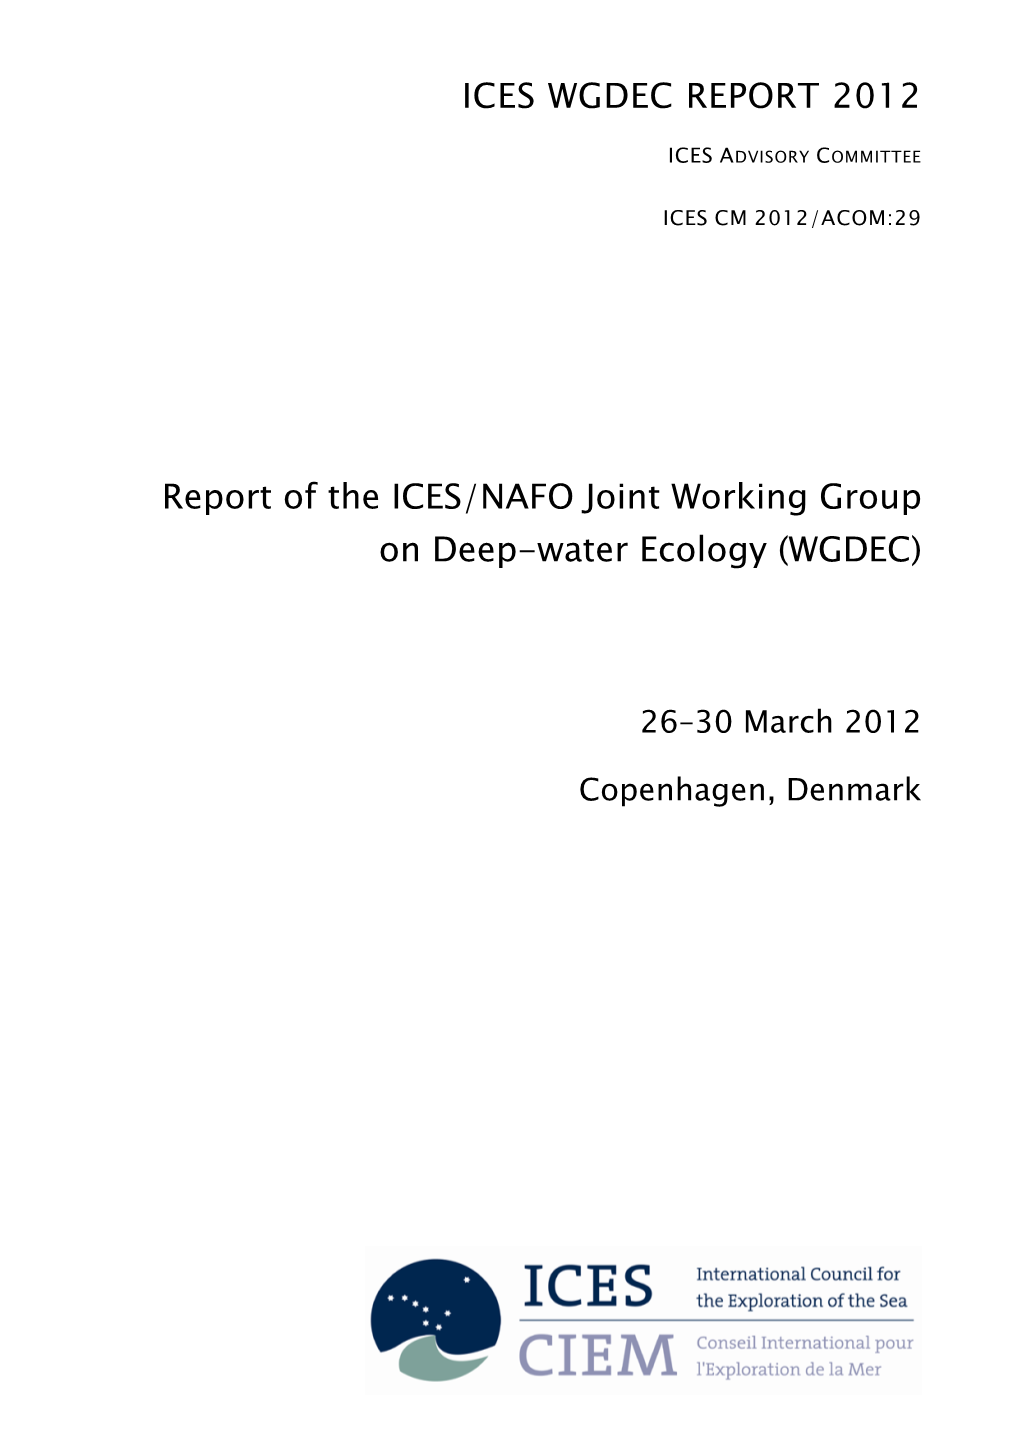 Report of the ICES/NAFO Joint Working Group on Deep-Water Ecology (WGDEC)